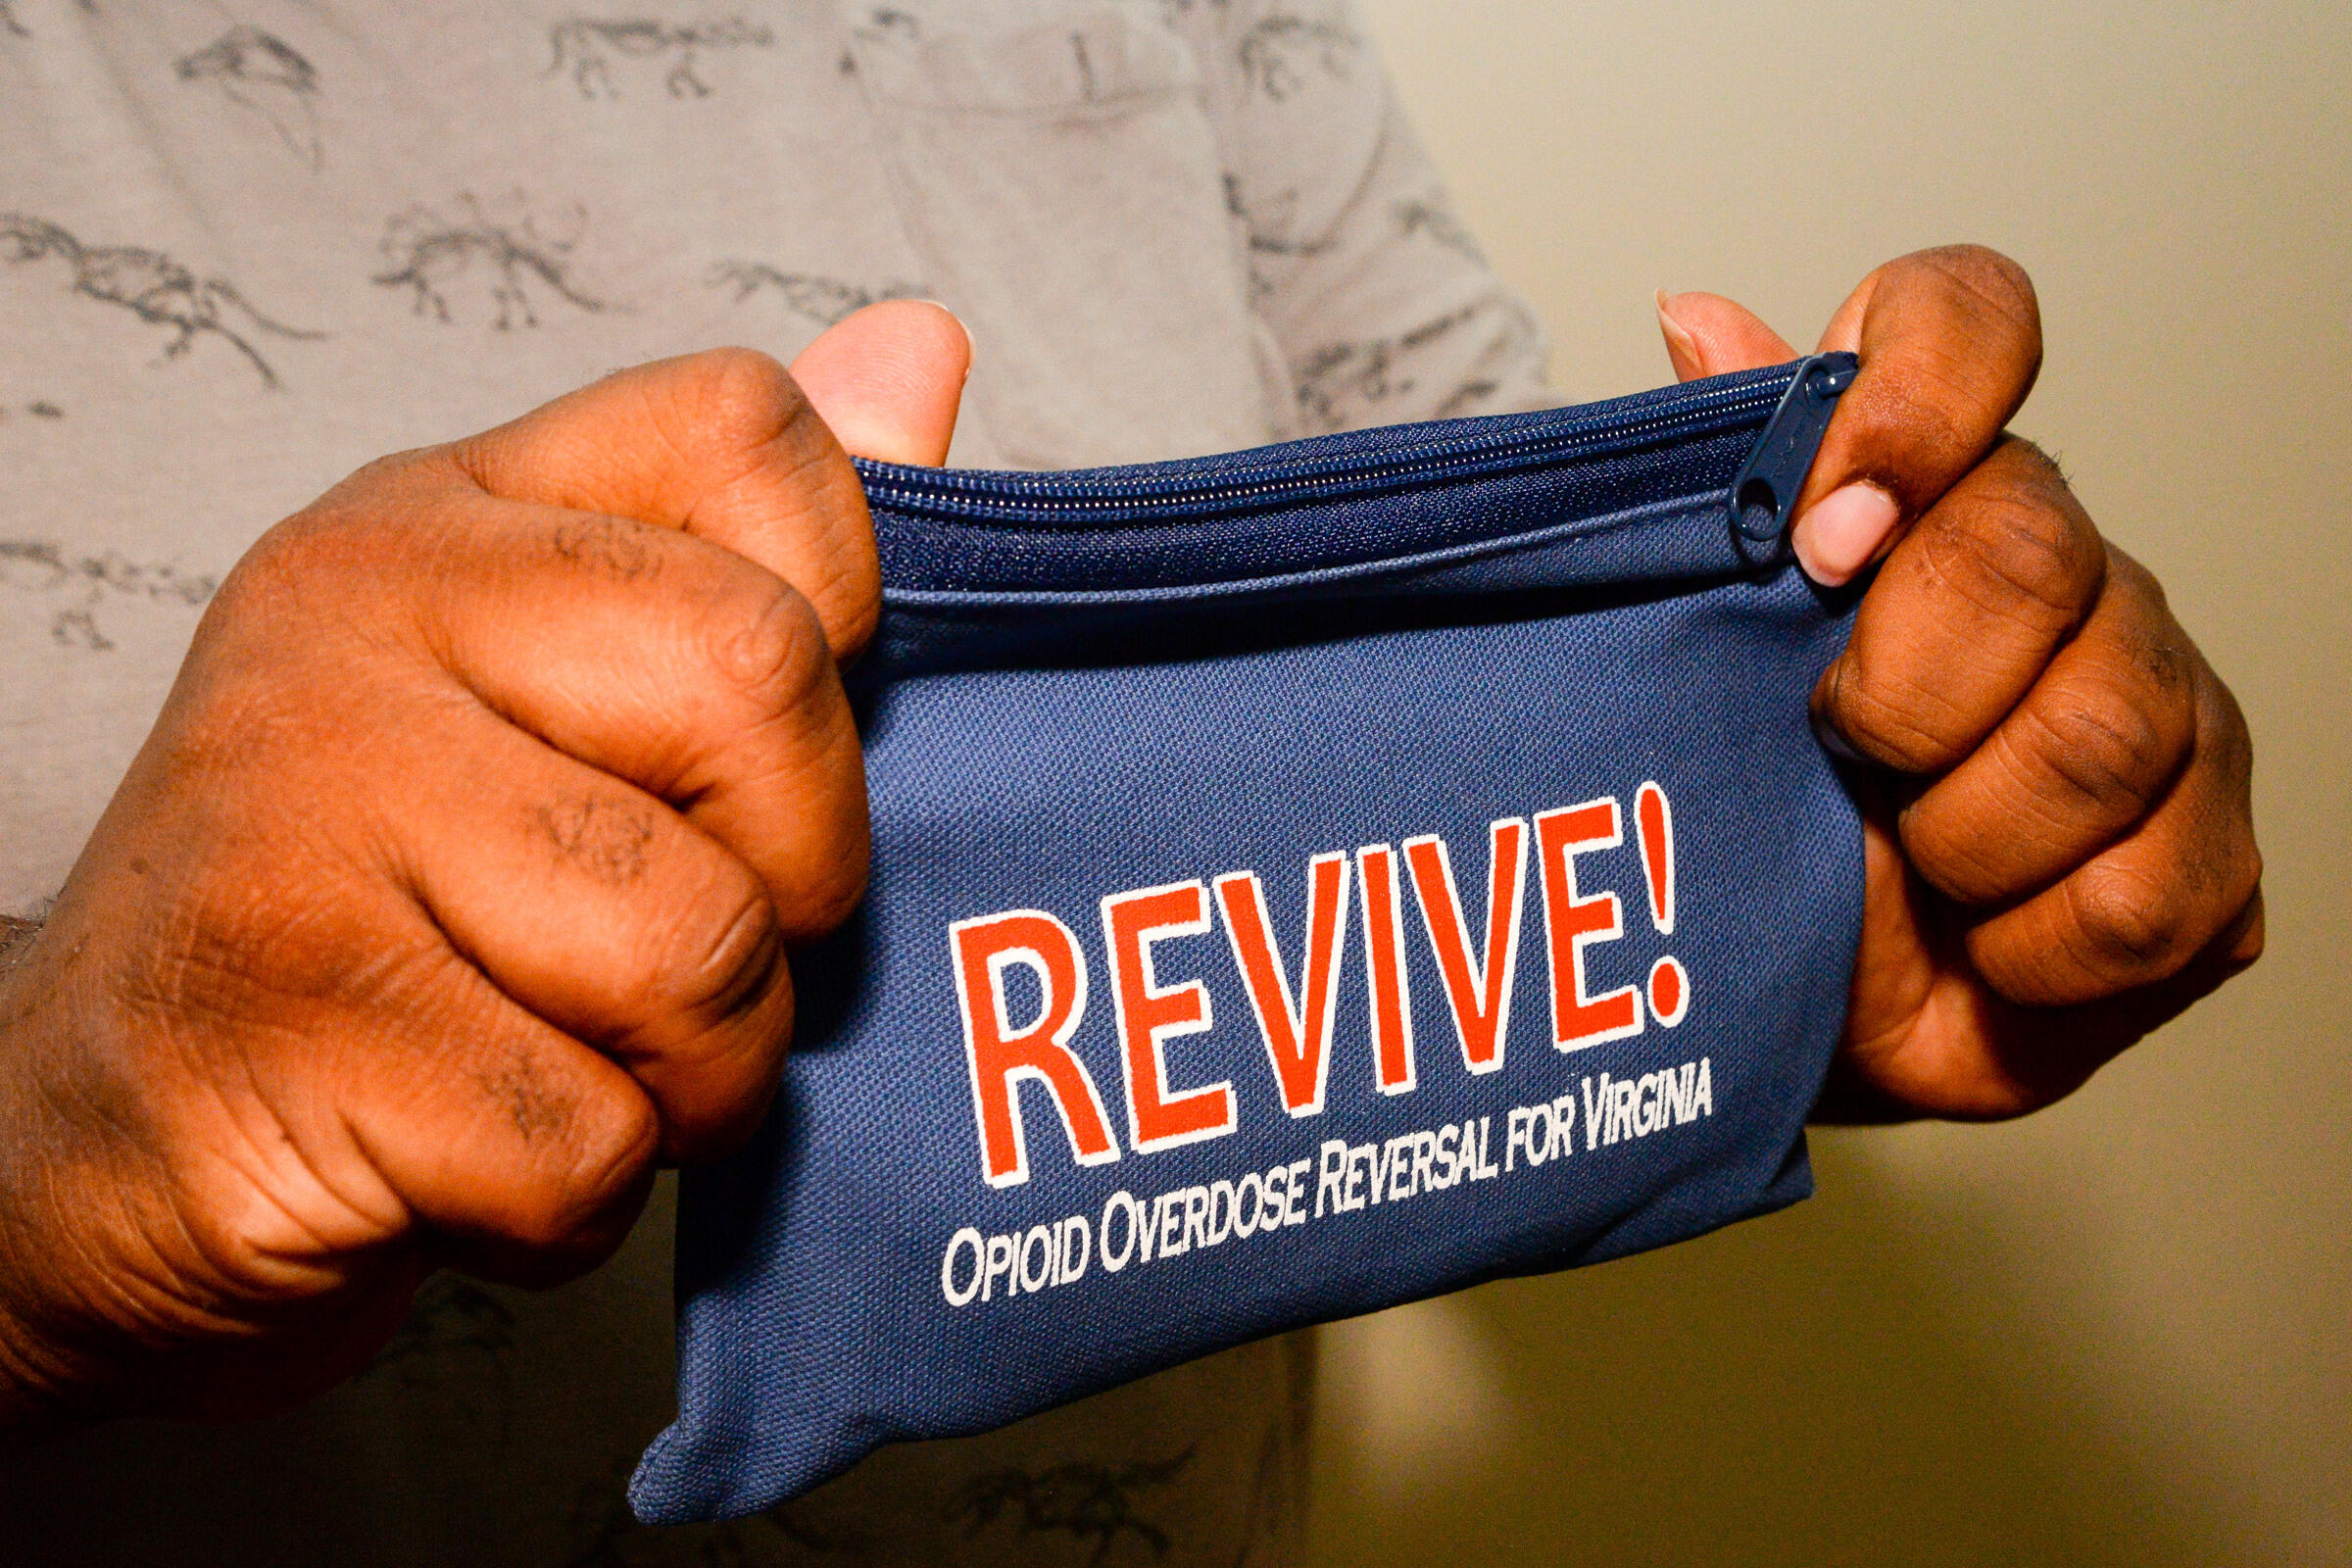 A man holds a small blue zipper bag labelled REVIVE - opioid overdose reversal for Virginia